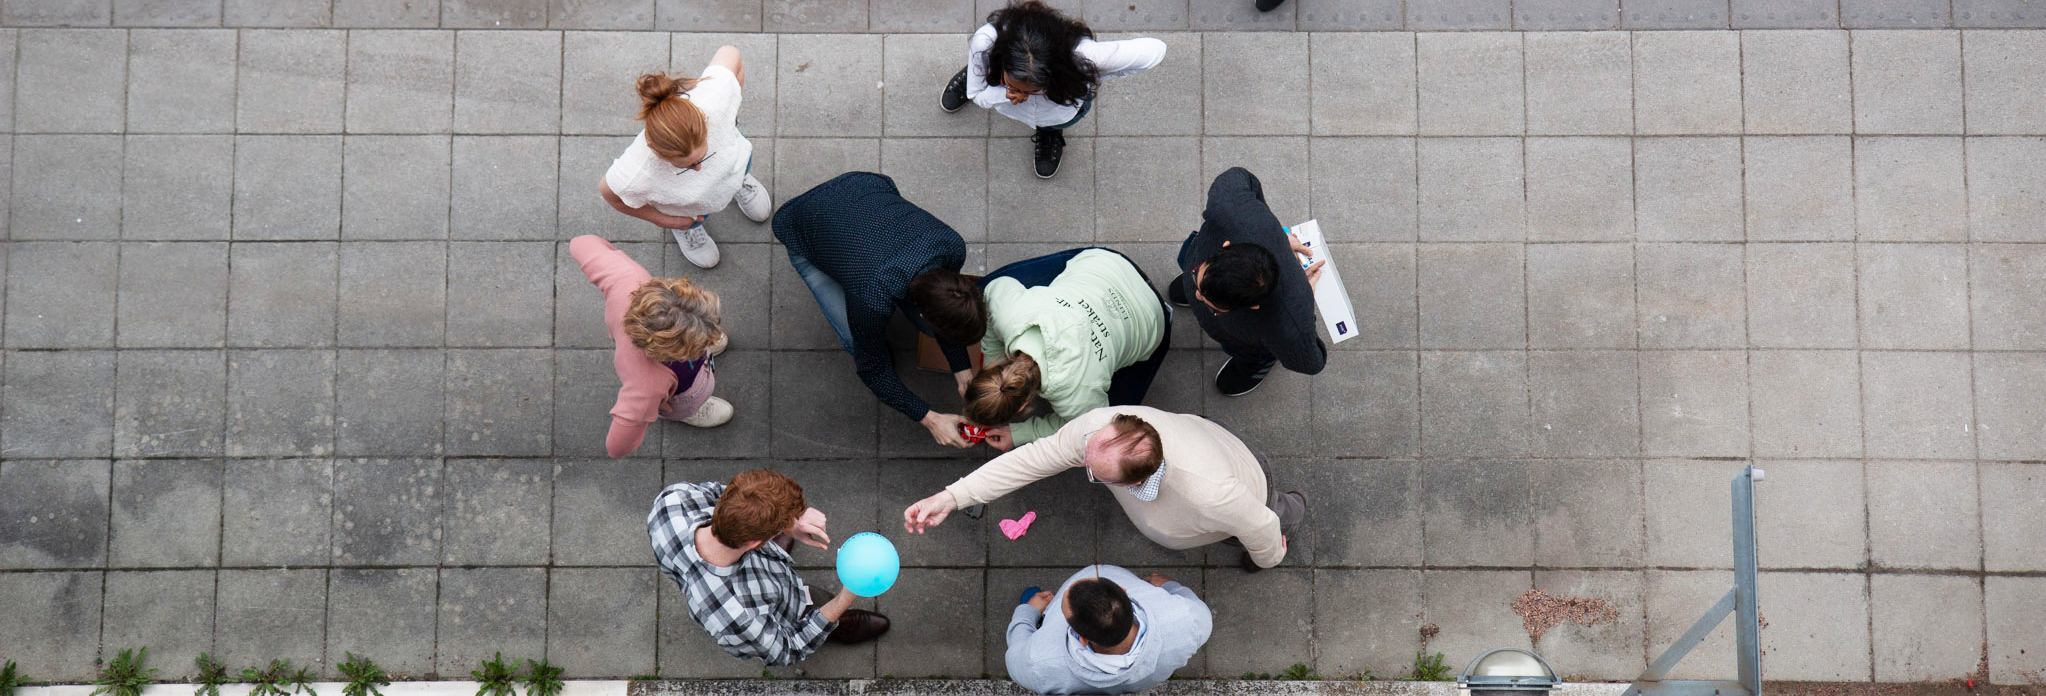 a group of people collaborating outside, seen from above. Photo. 